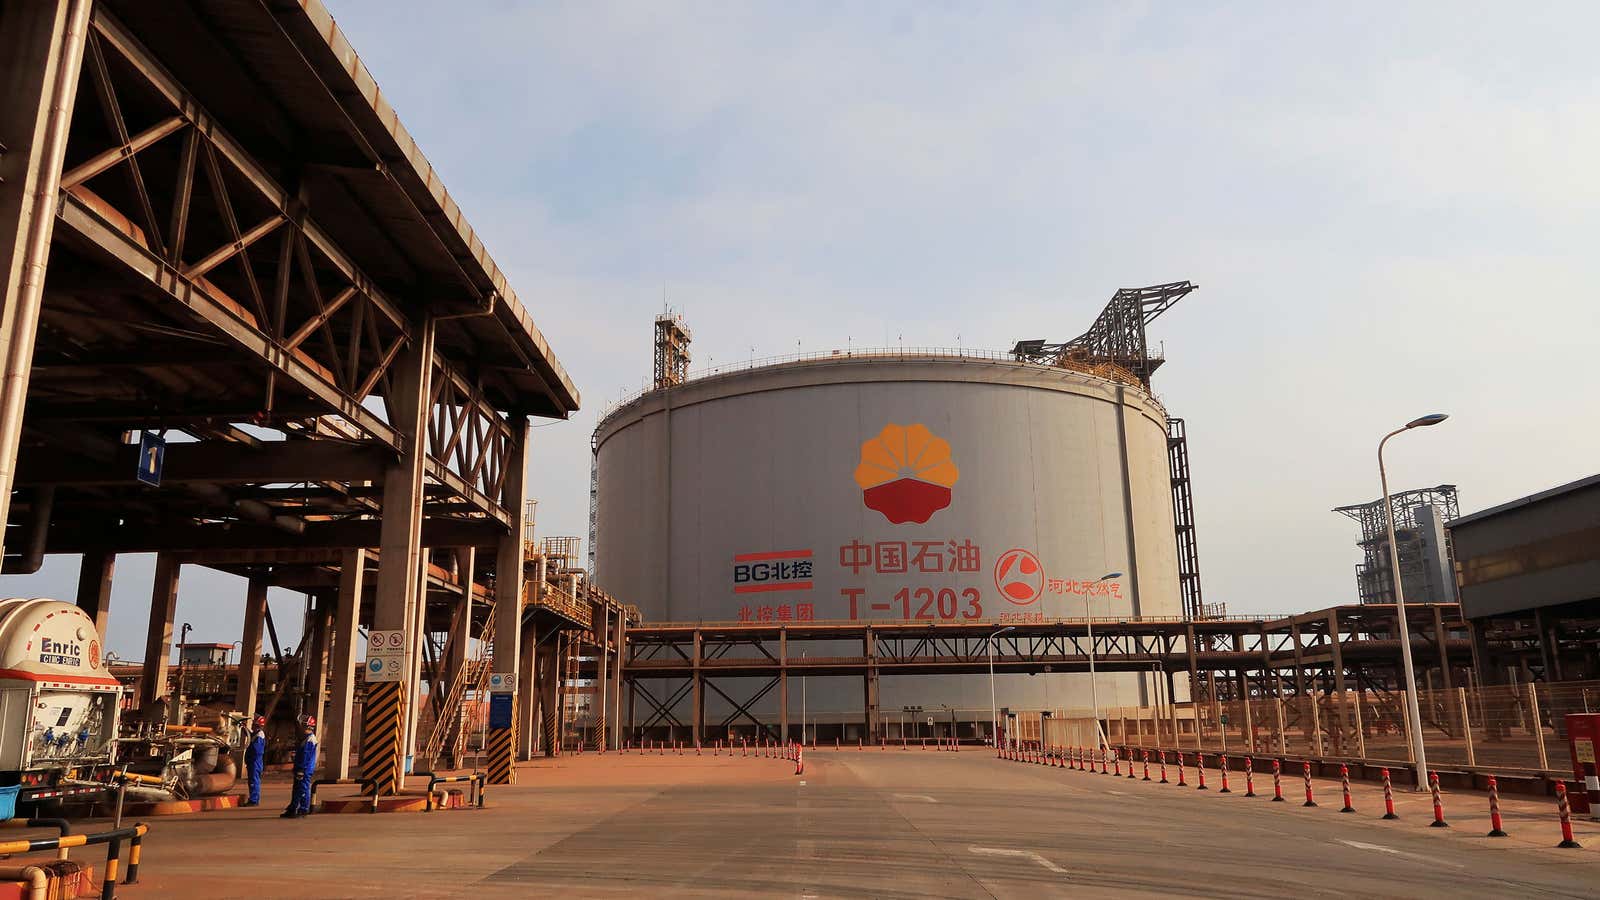 A liquefied natural gas storage tank in Heibei, China.